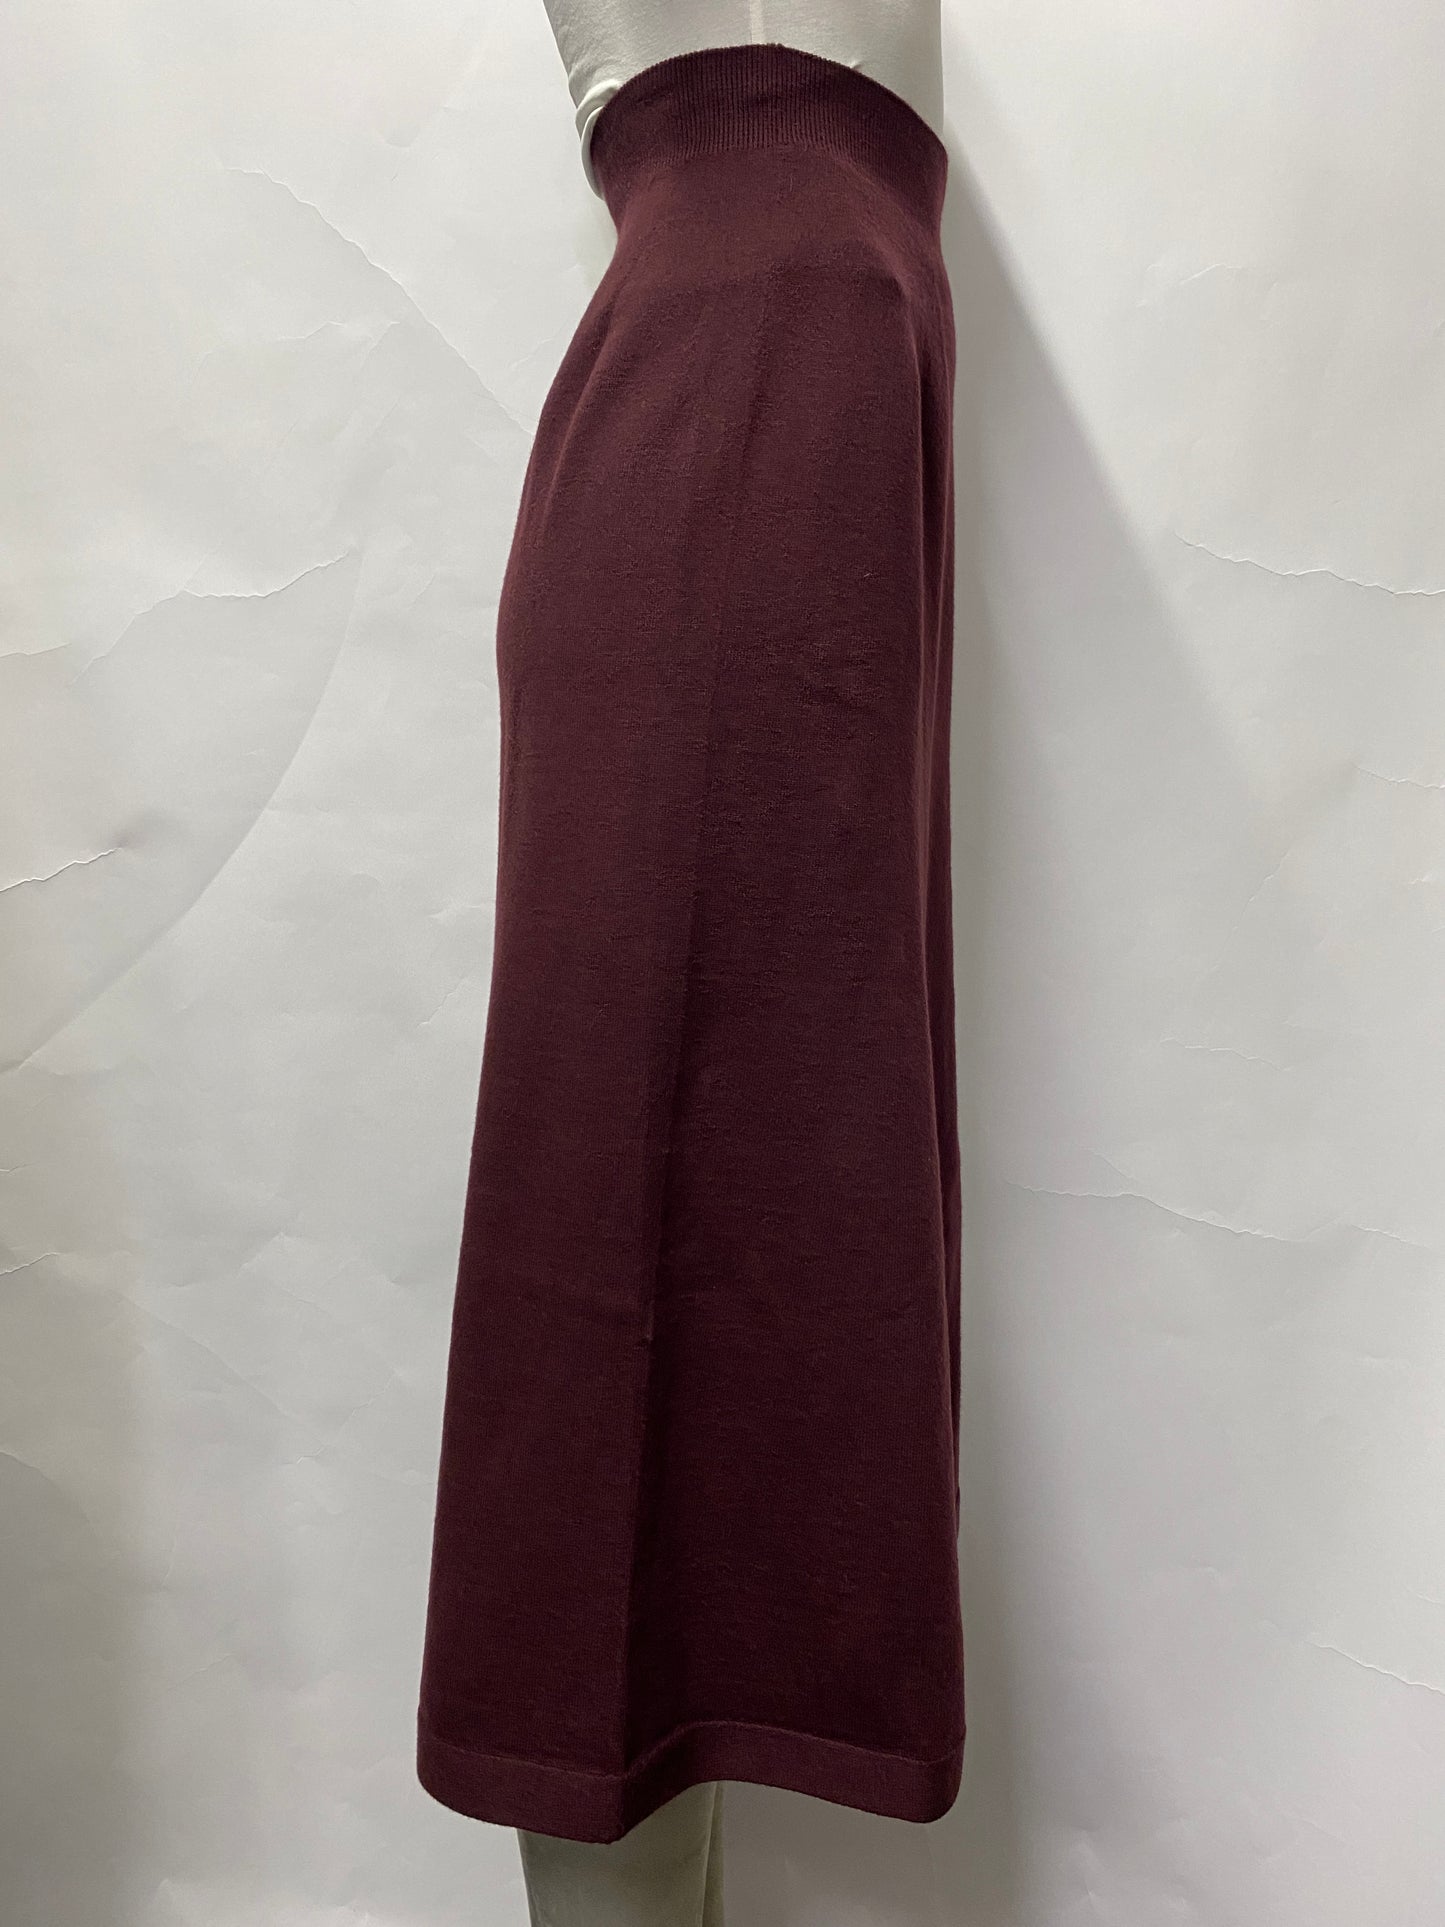 Uniqlo Burgundy 3D Knitted A-line Skirt XS BNWT